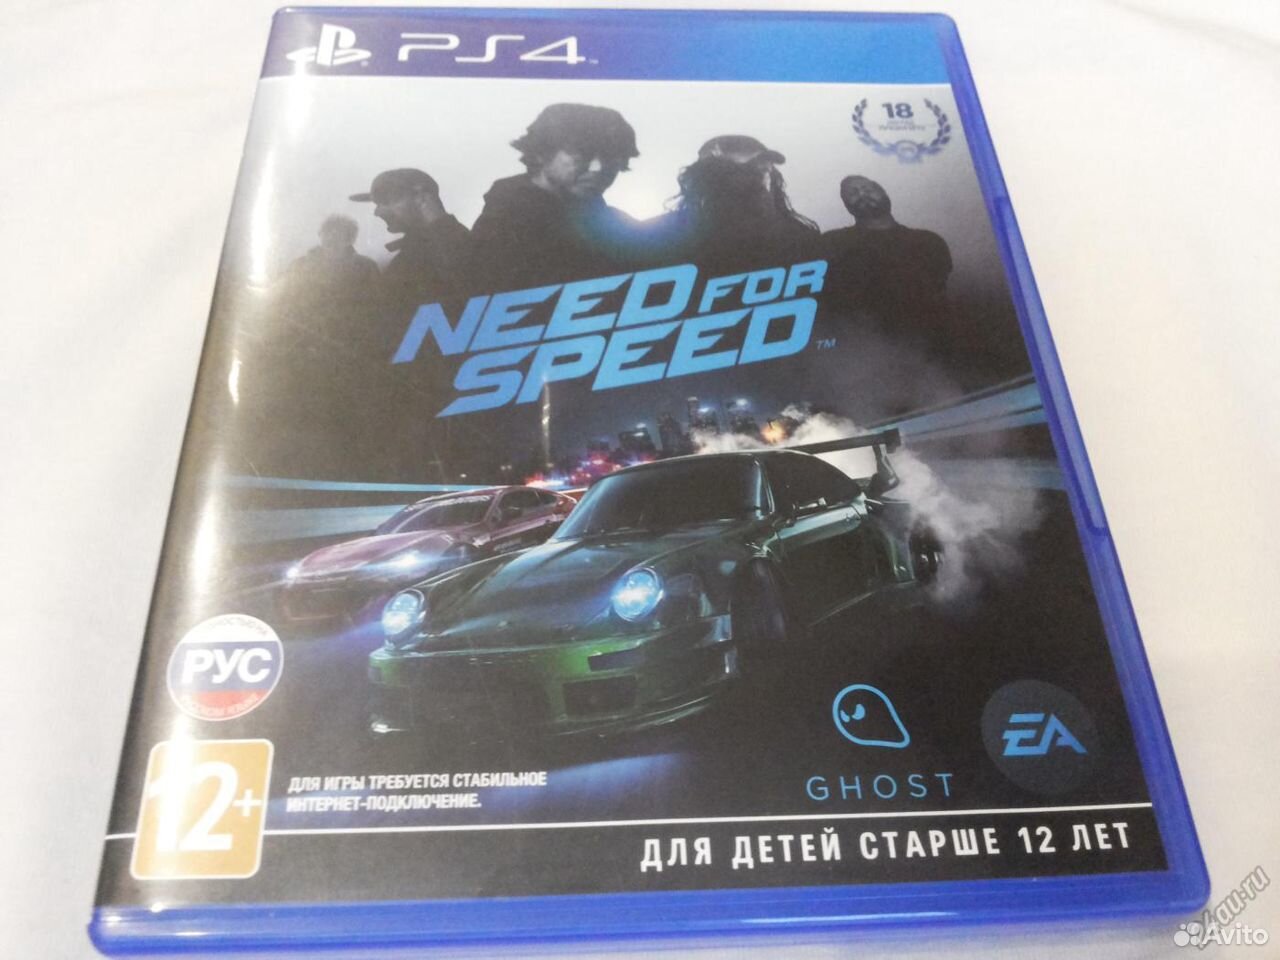 Нид фор спид пс. Need for Speed ps4 диск. Need for Speed 2015 диск плейстейшен 4. Нид фор СПИД на пс4. Need for Speed PLAYSTATION 4.